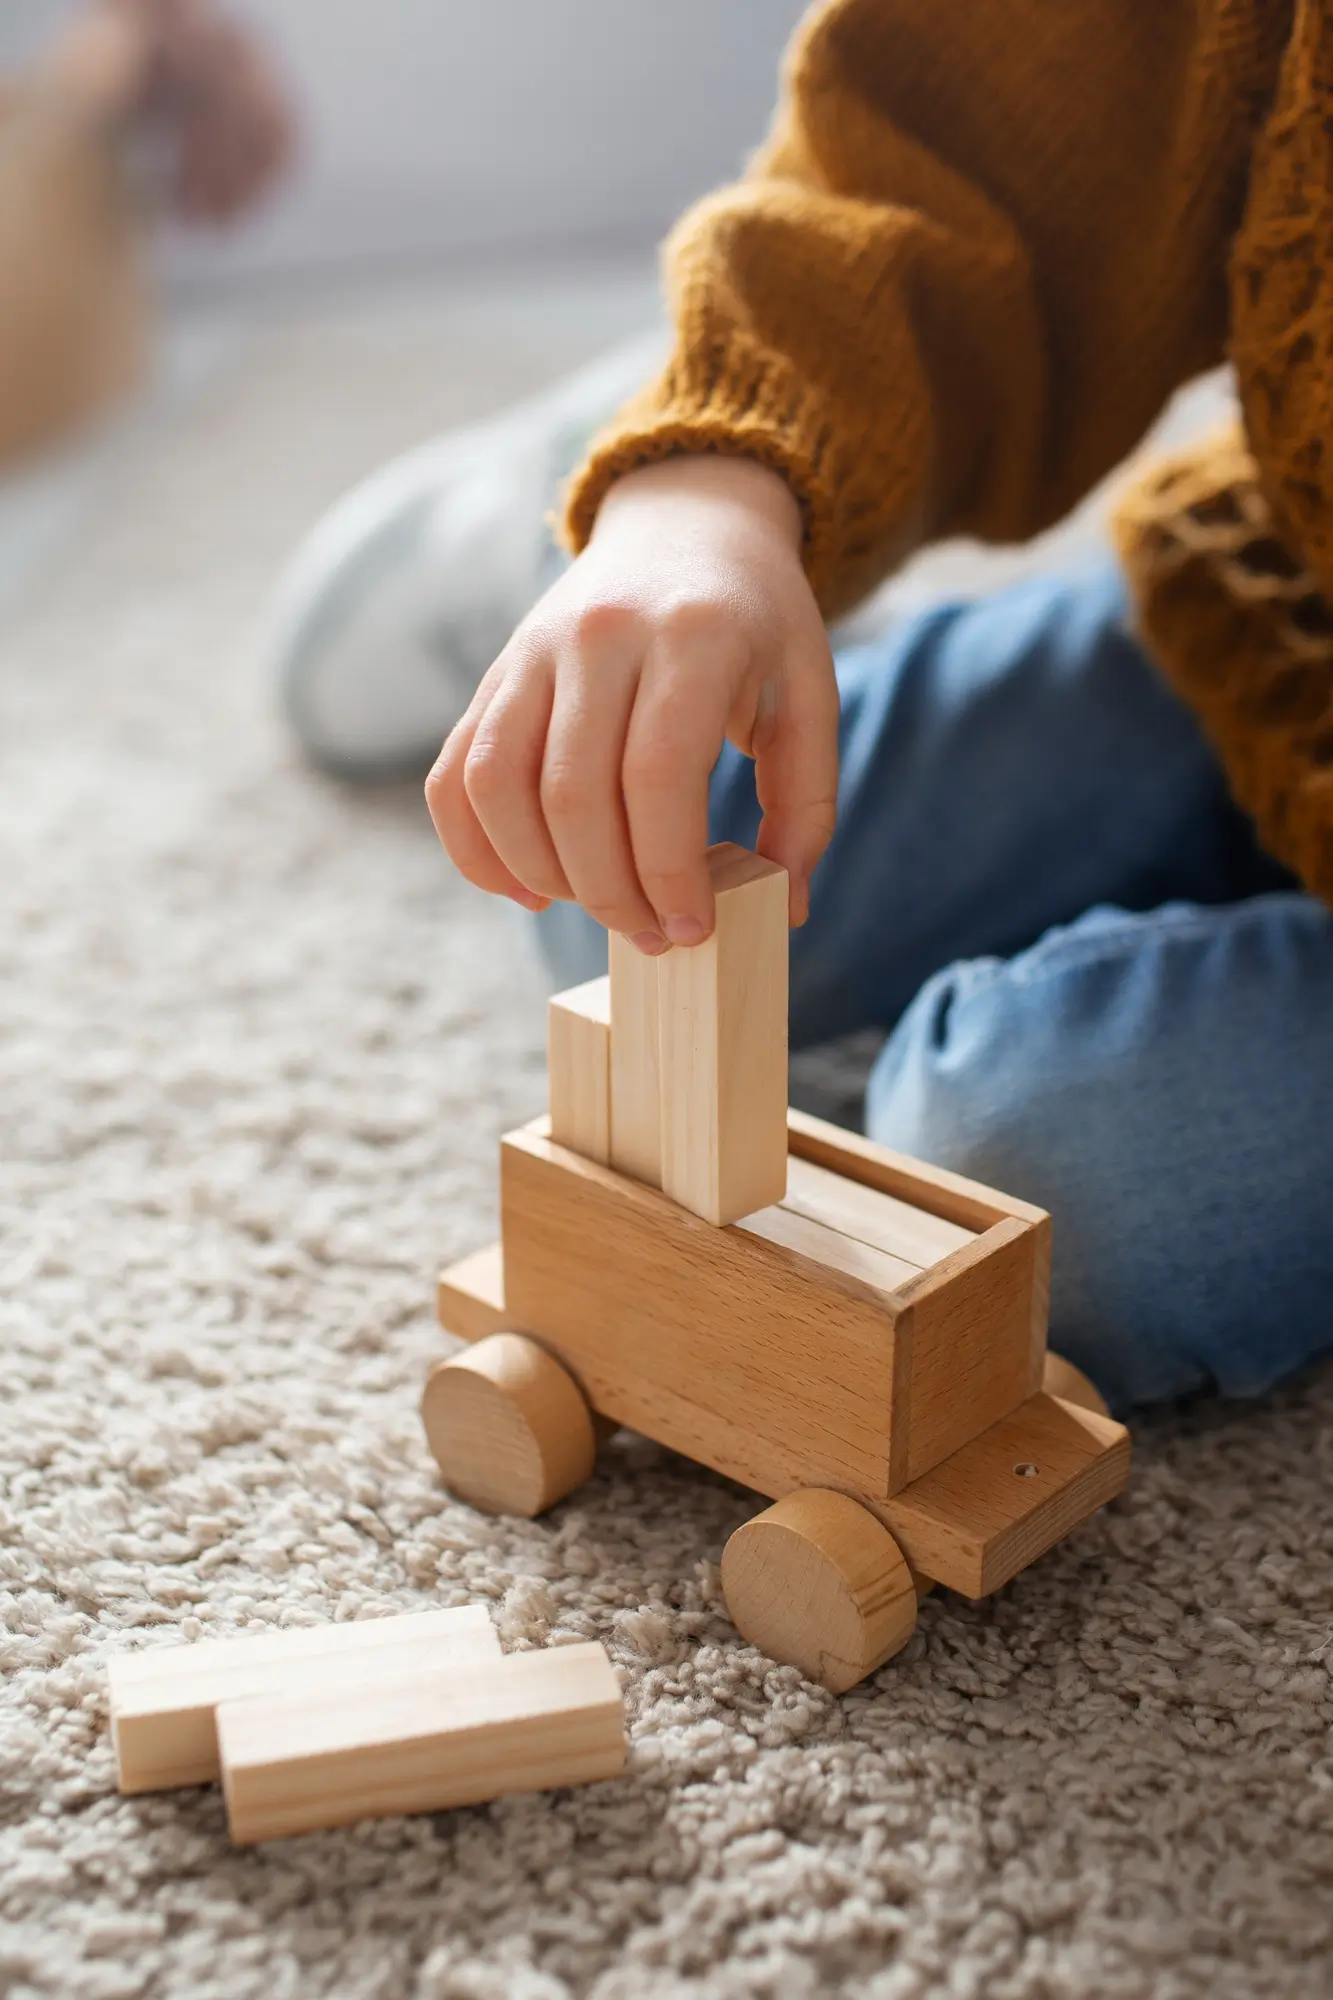 Wooden toys and games